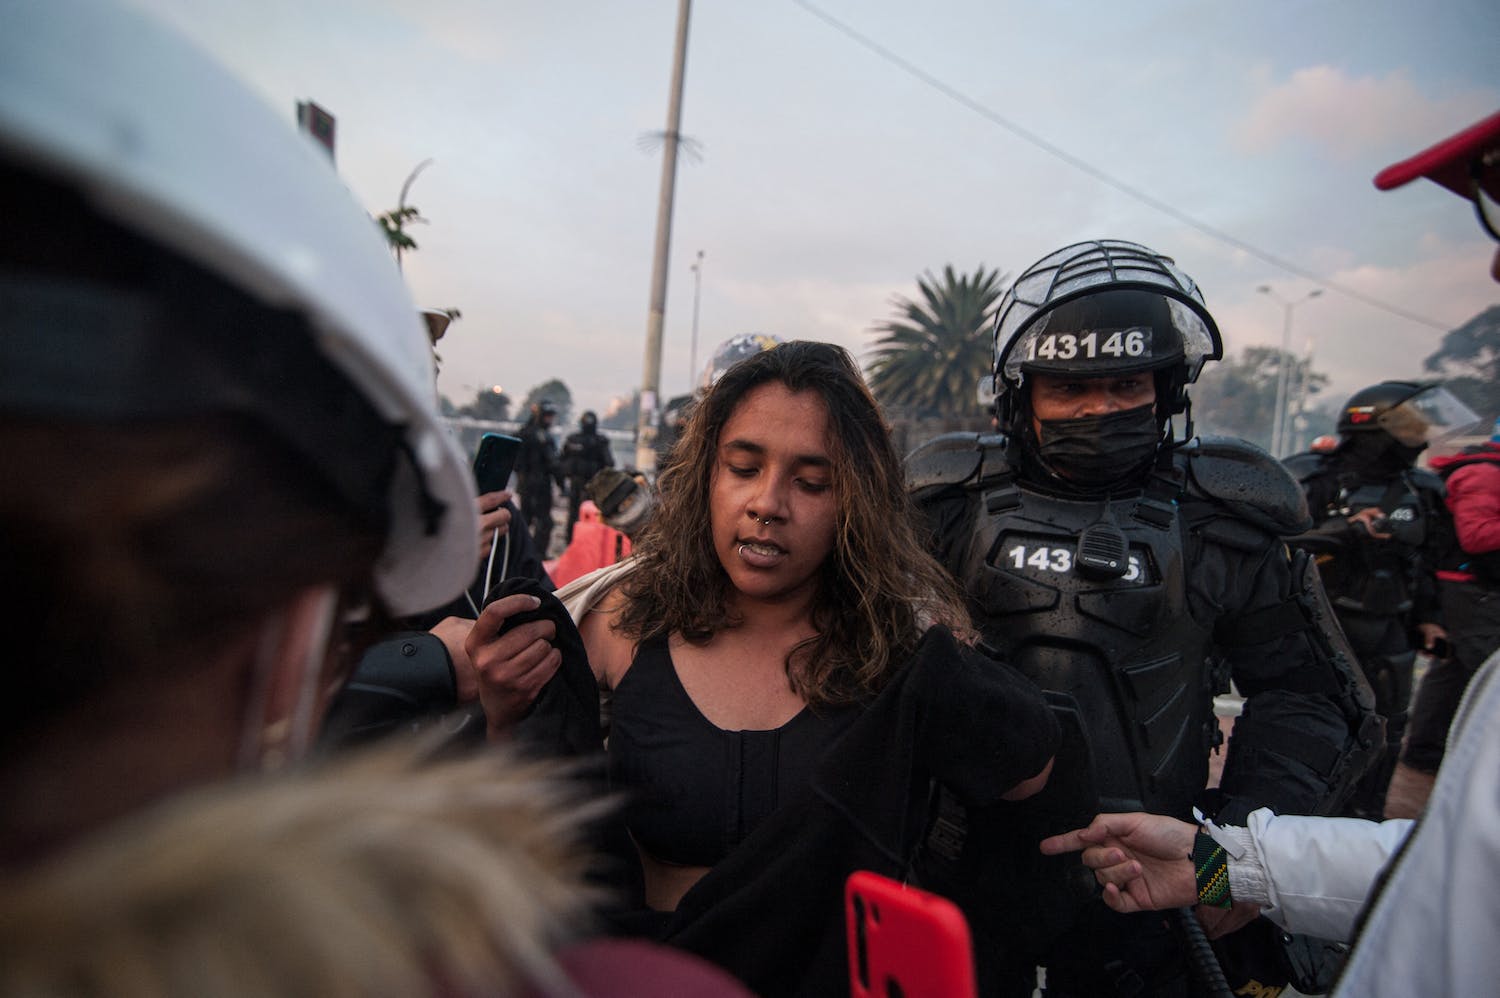 Lady at a protest being taken away by police